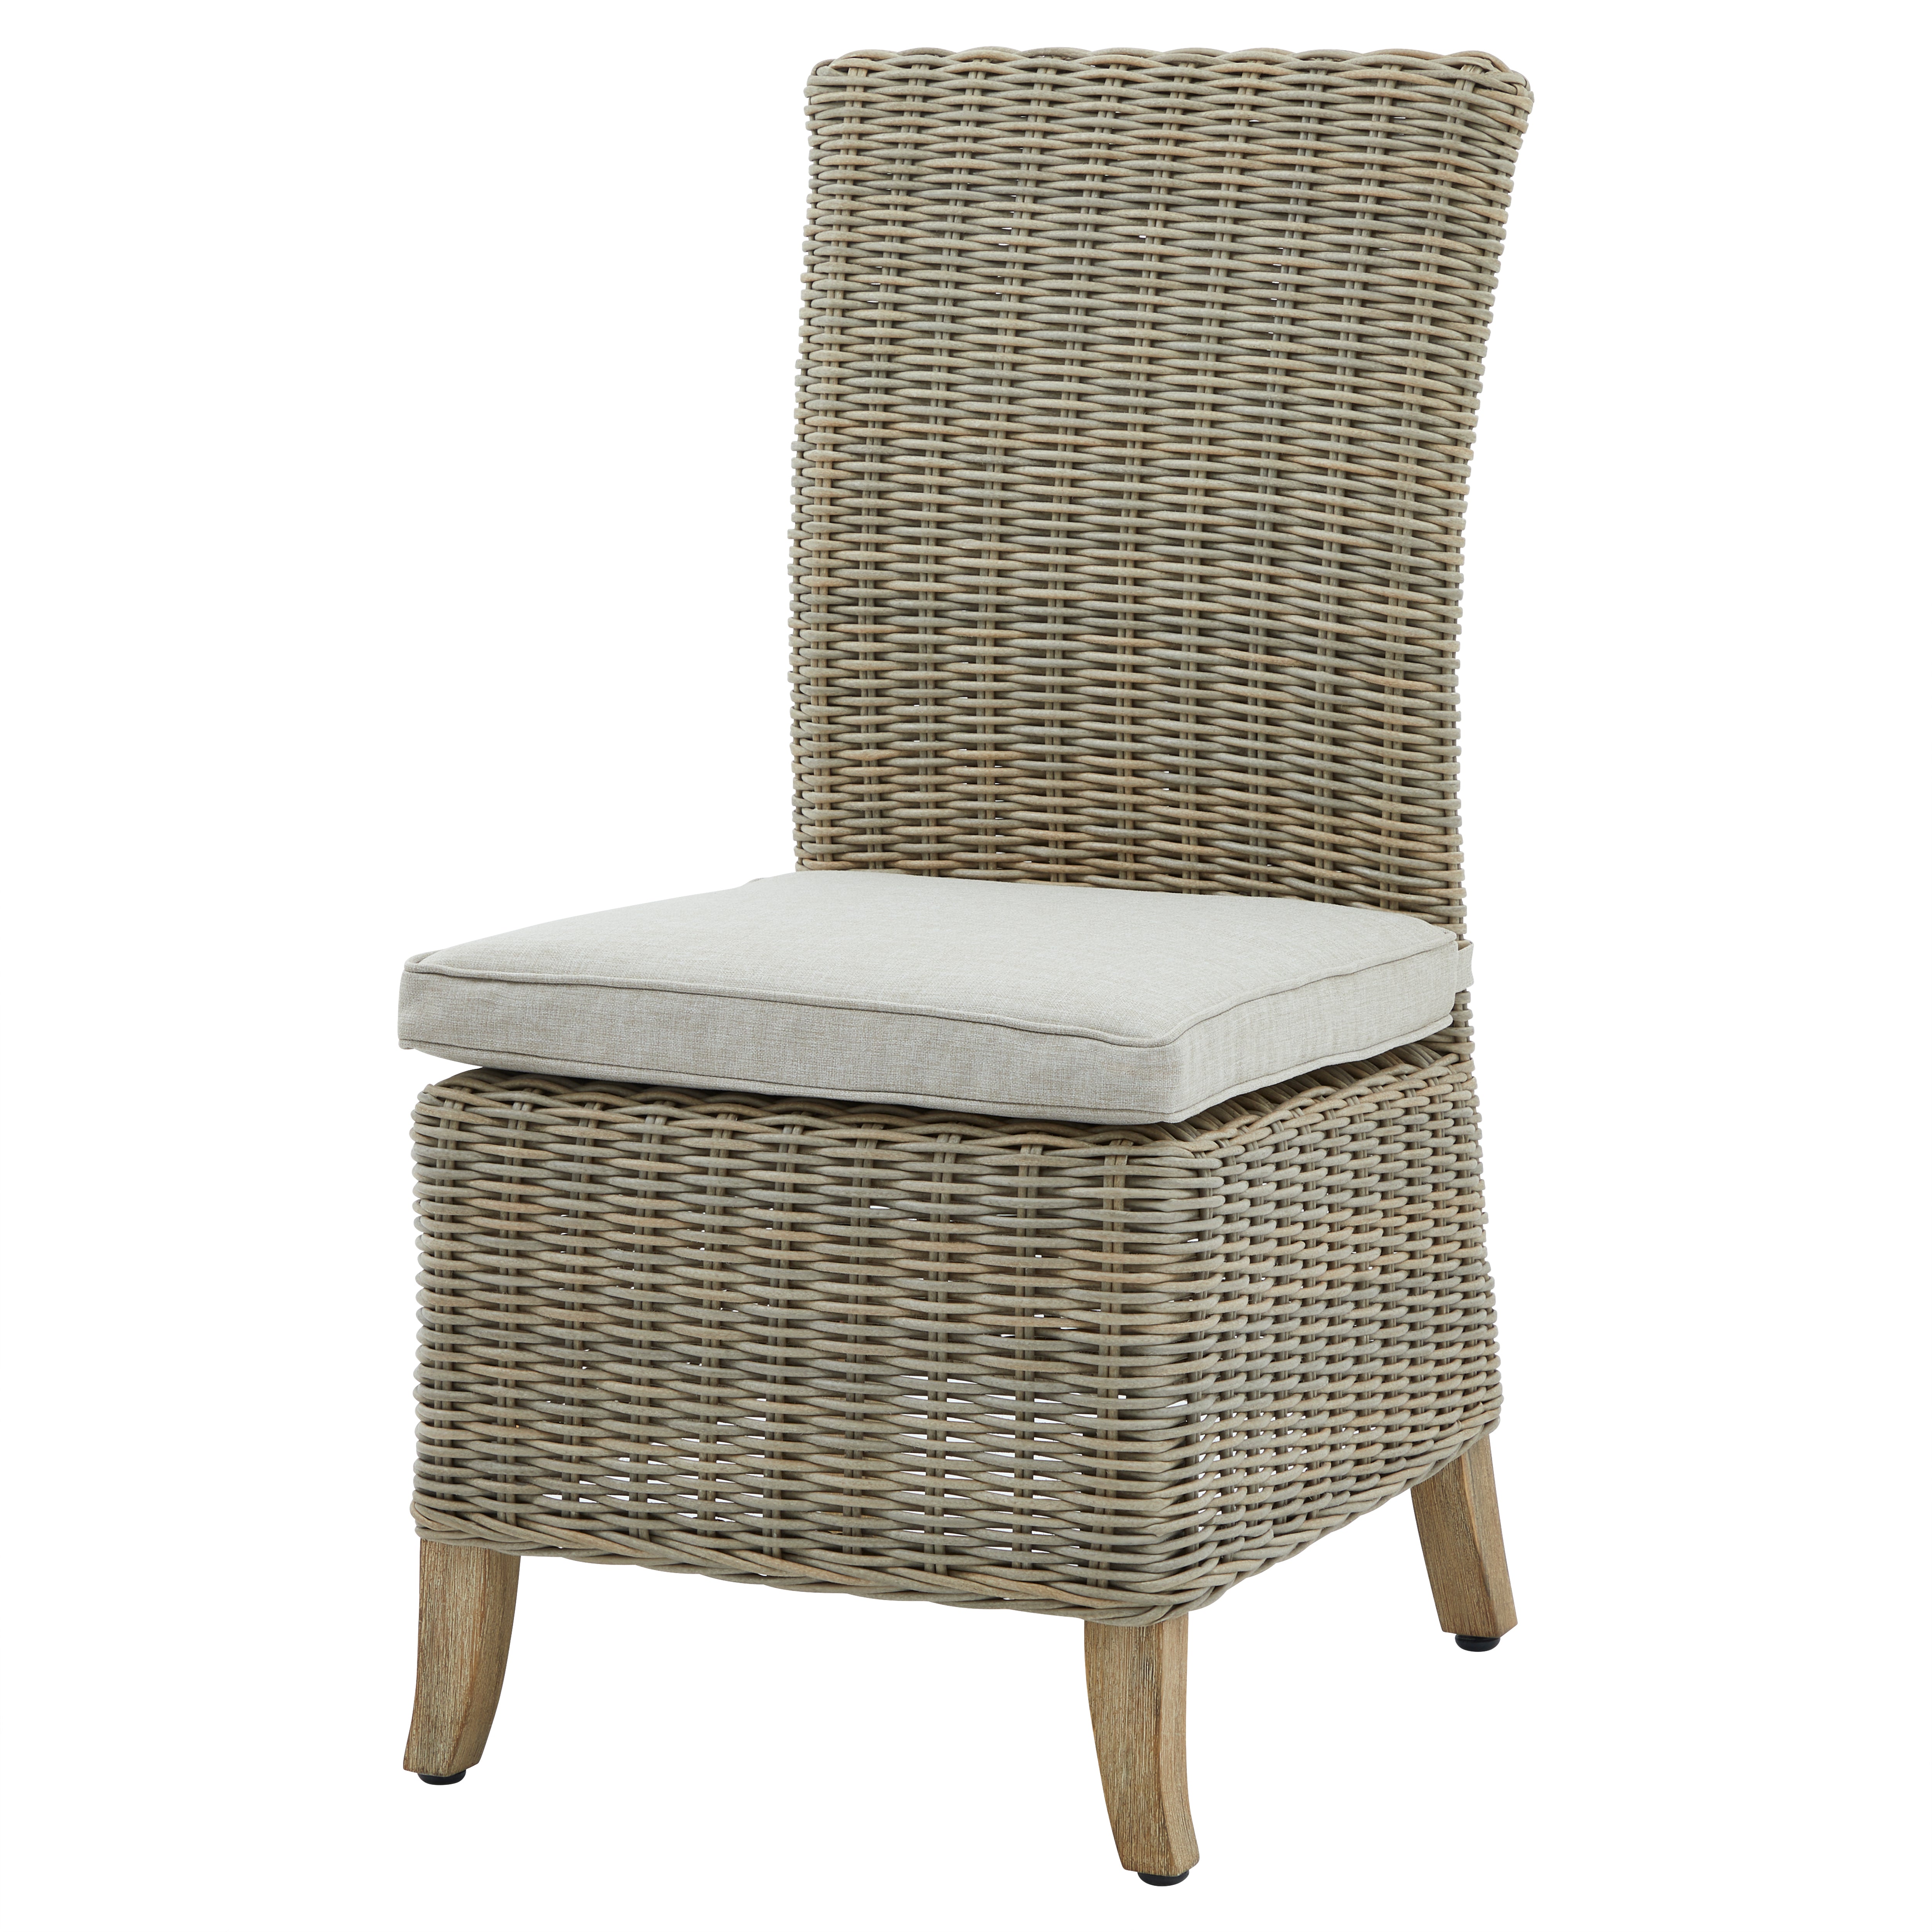 View Capri Collection Outdoor Dining Chair information